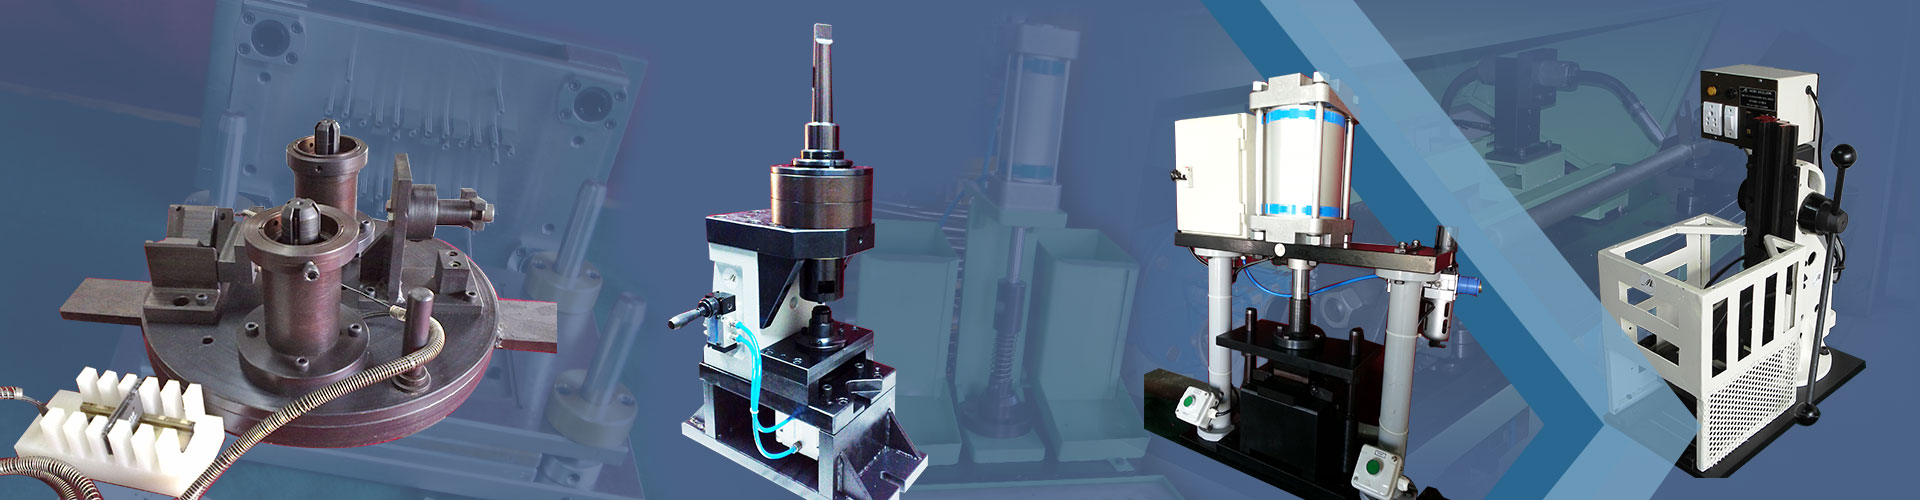 SPECIAL PURPOSE MACHINES, LOW COST AUTOMATION, JIGS AND FIXTURES